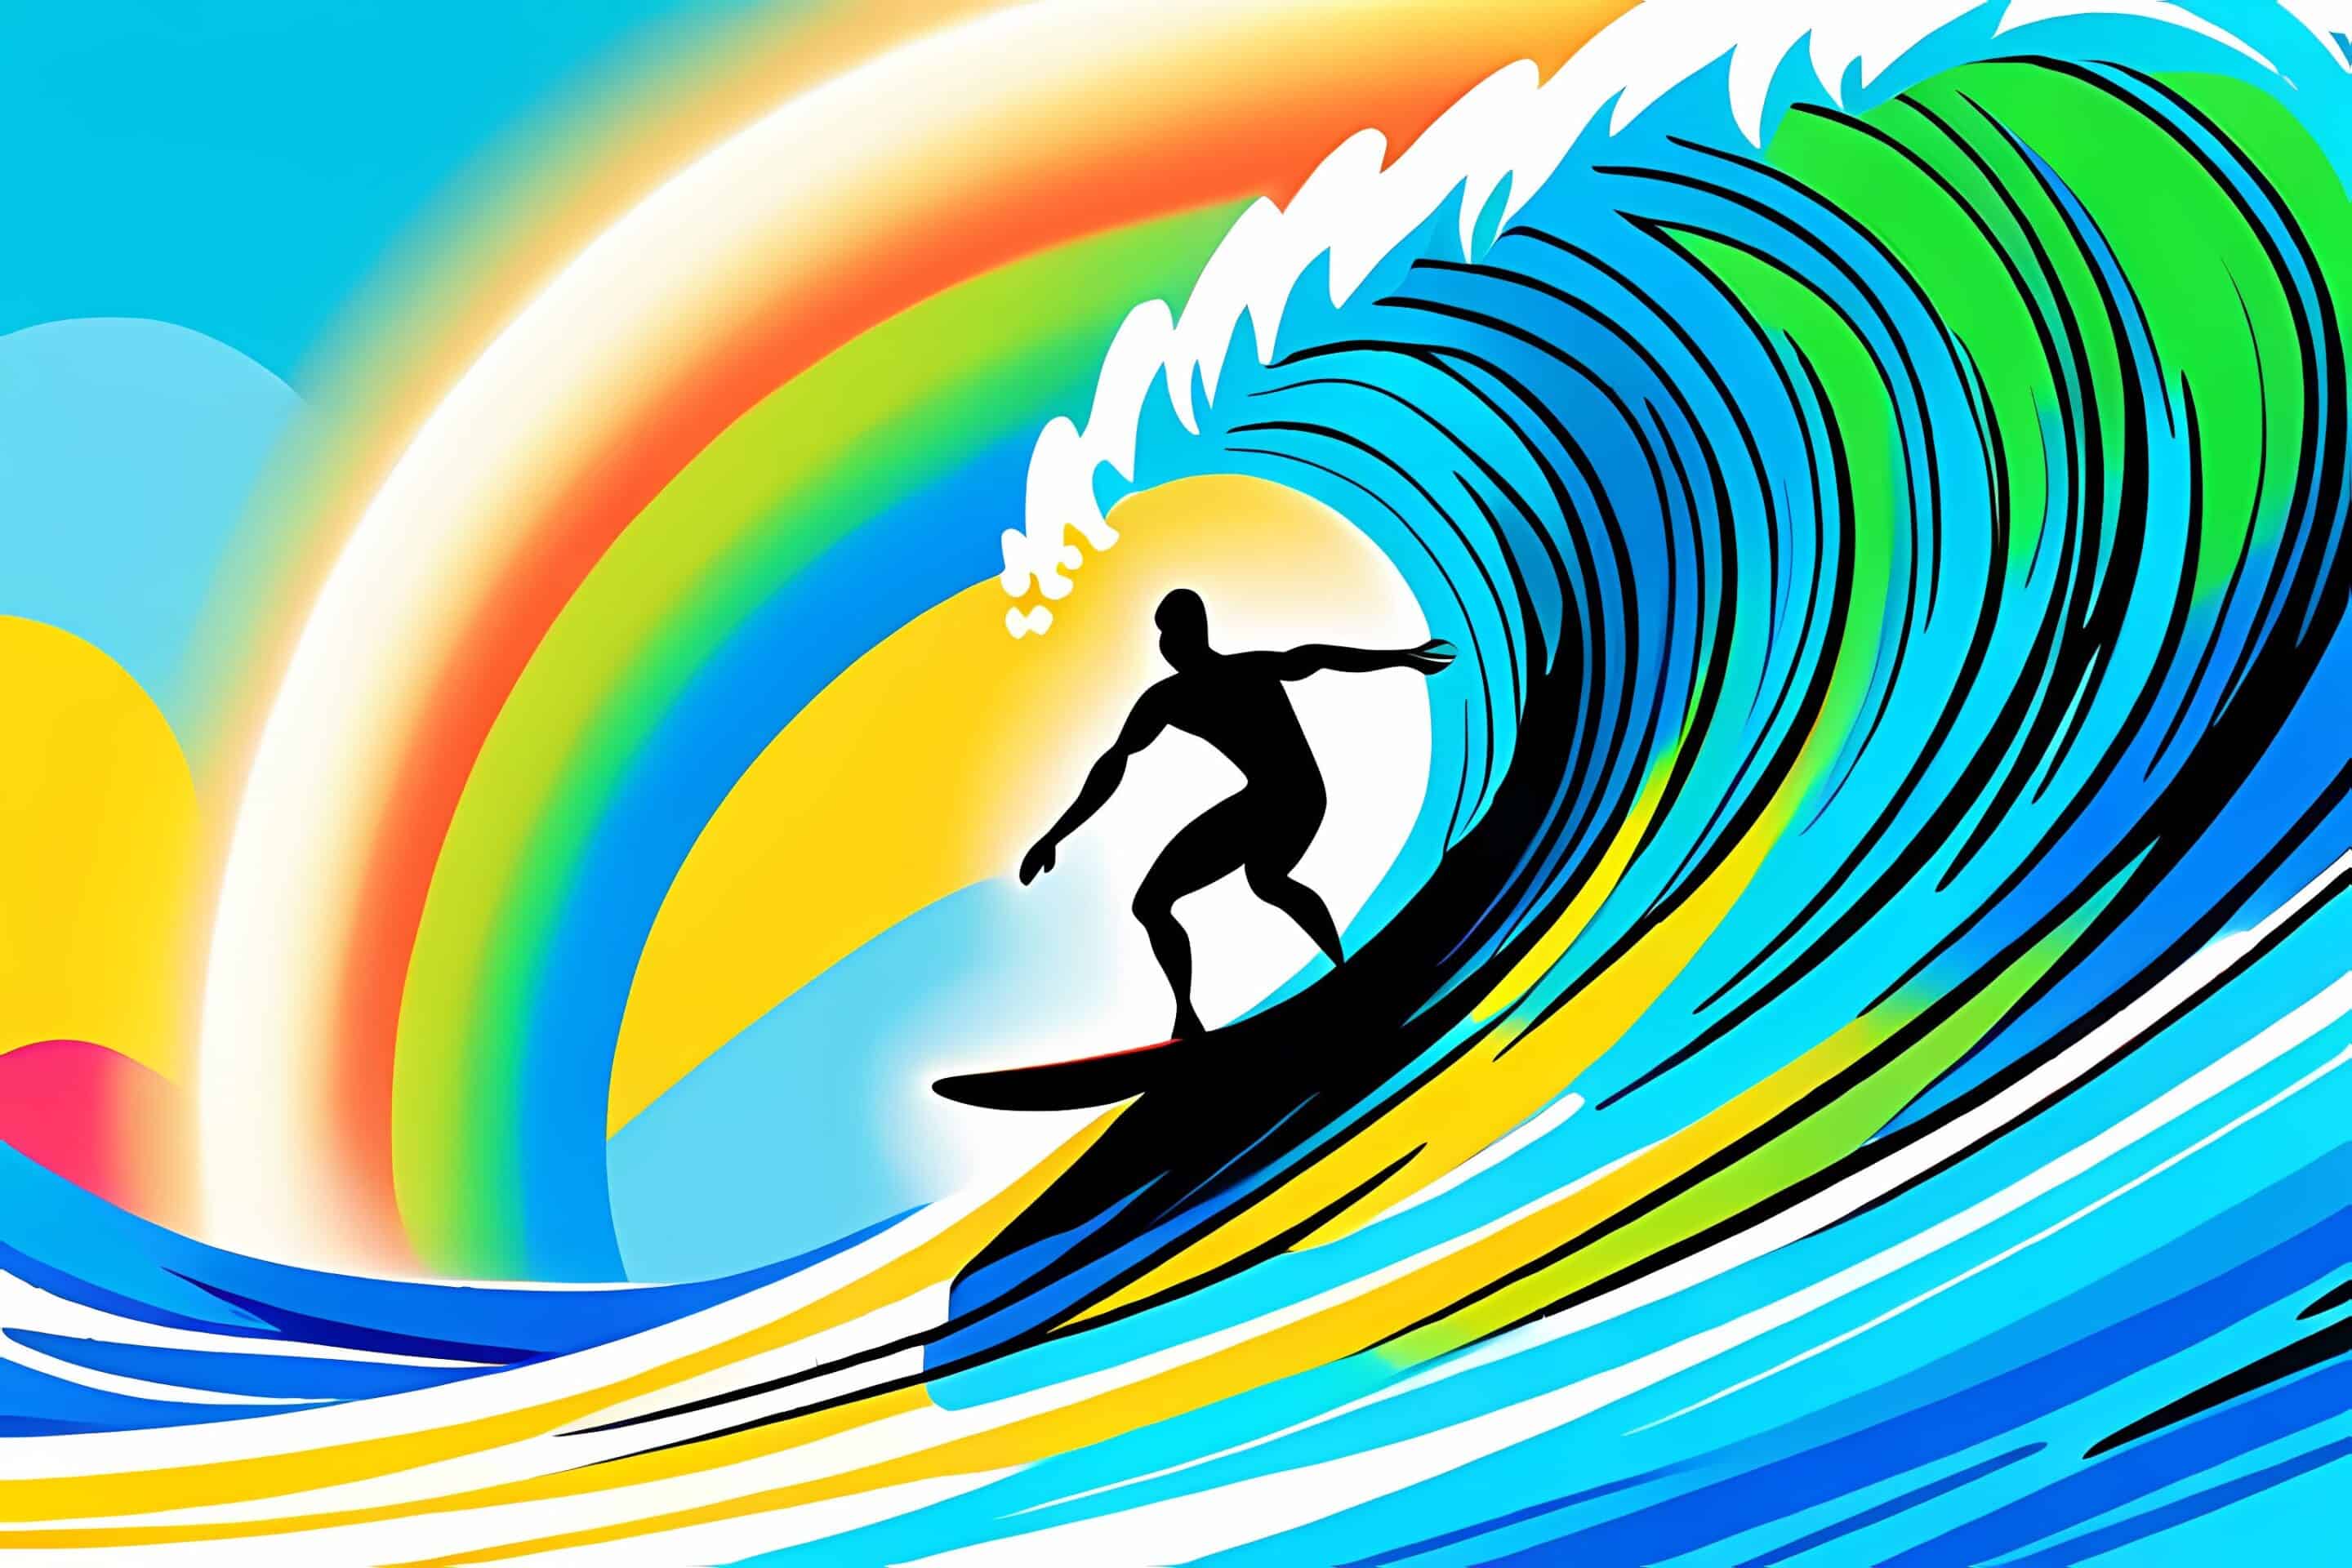 Riding Life's Waves: Embrace the Surfboard of Opportunity